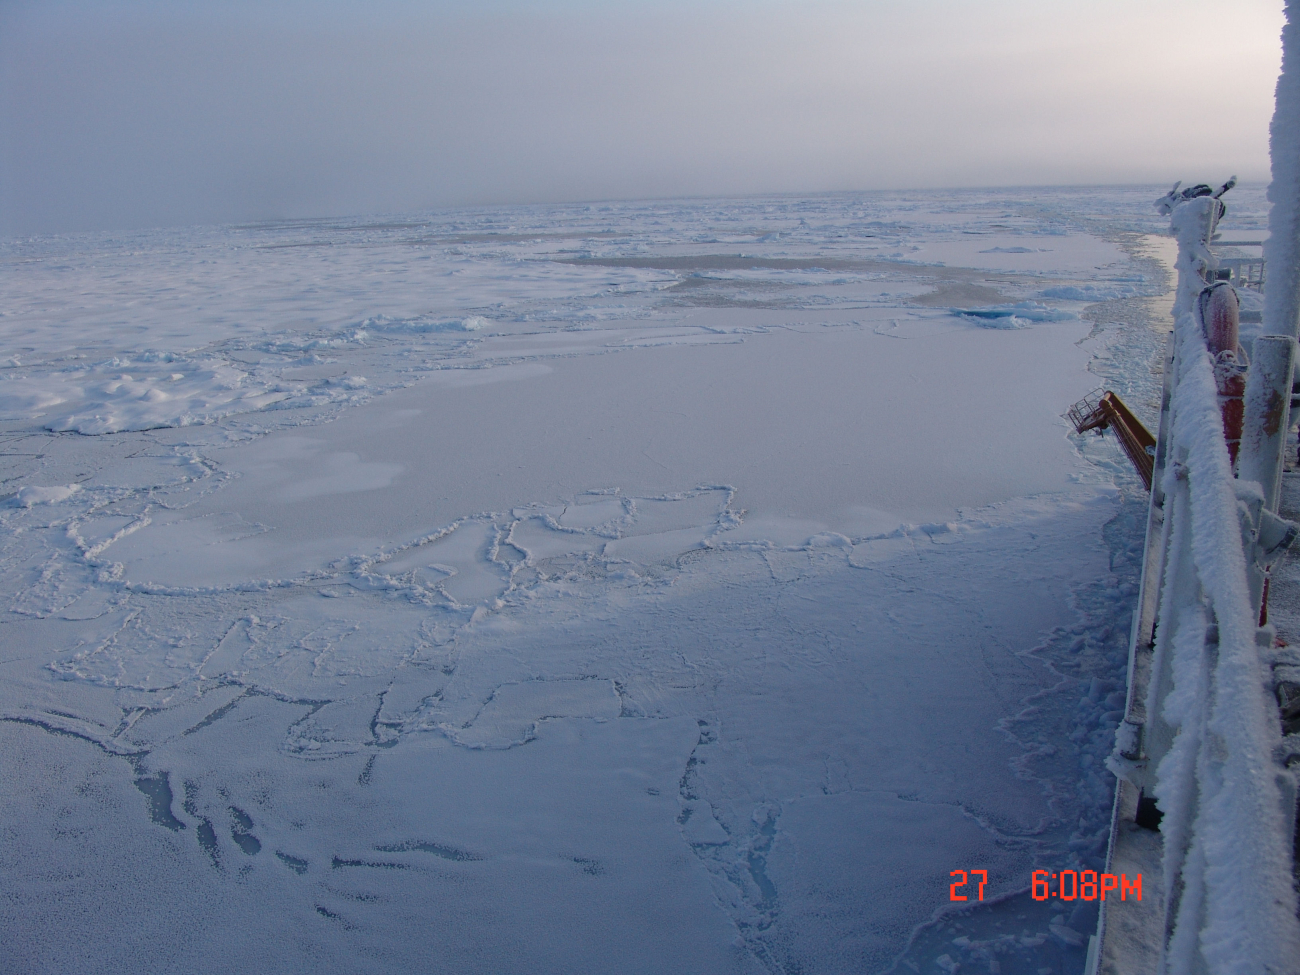 Healy traversing an area of floes of first year ice